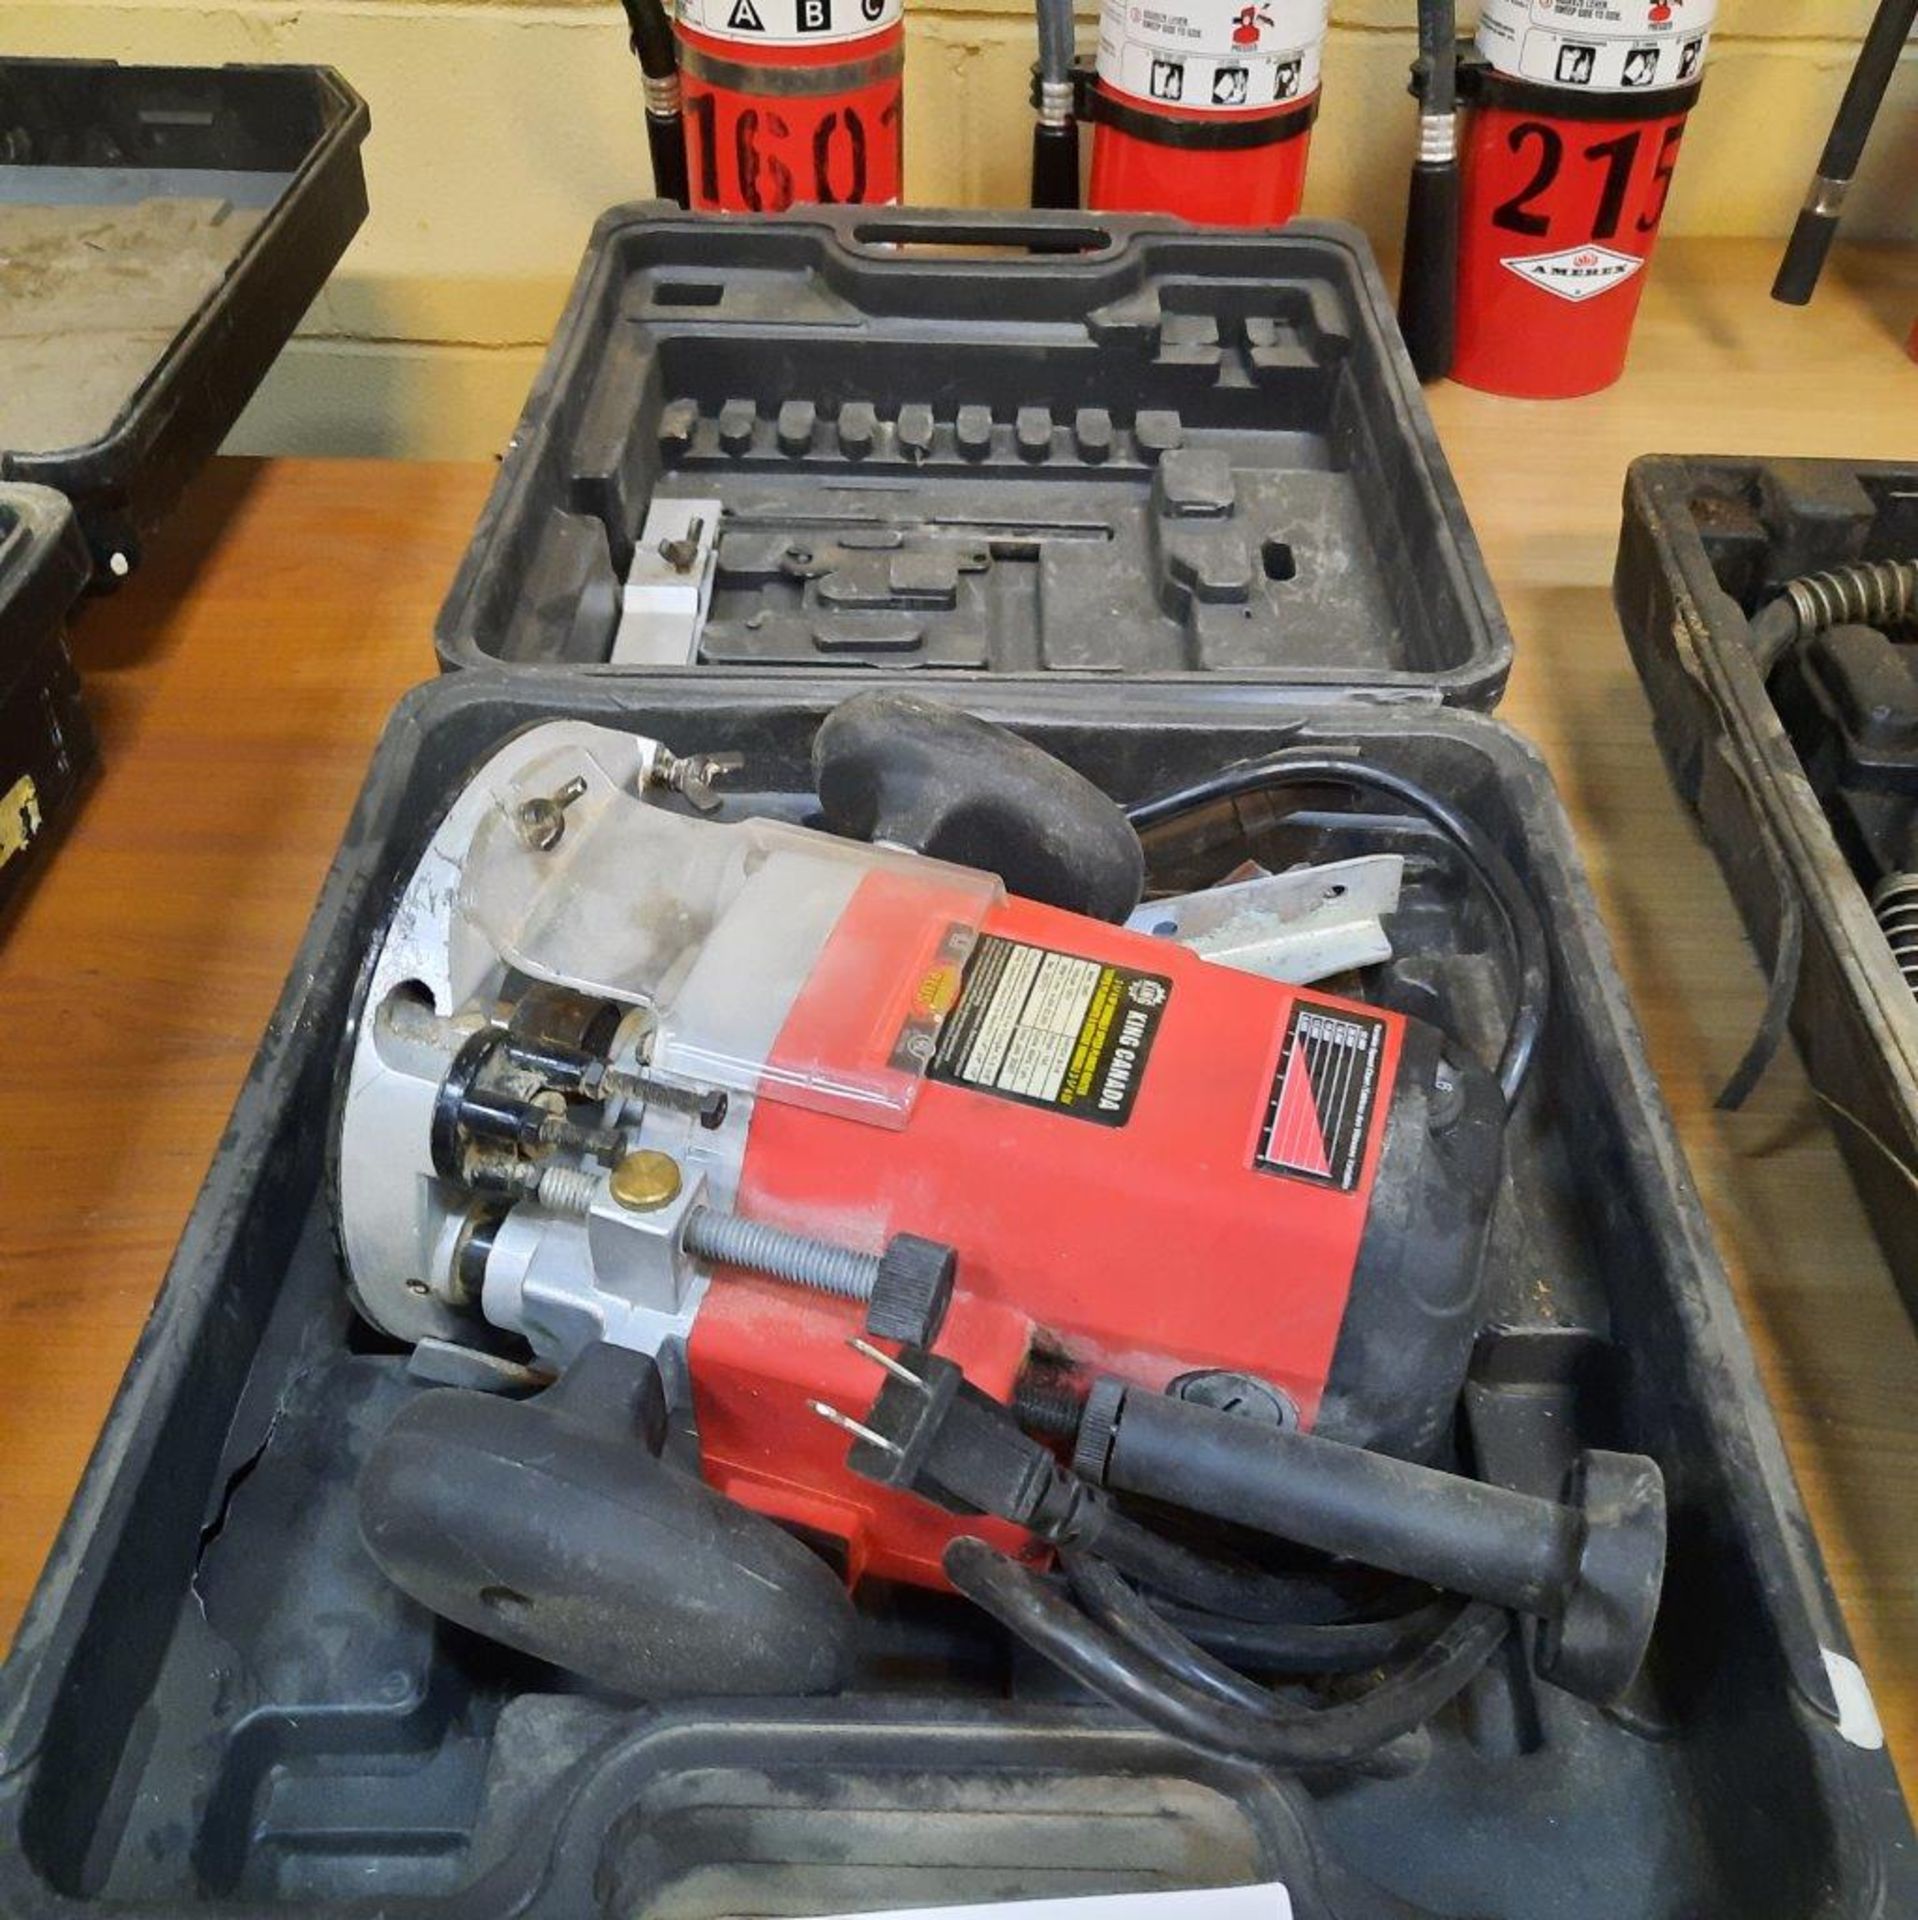 KING HD 3 1/4 HP Variable Speed Plunge Router, mod: 8367, c/w Case